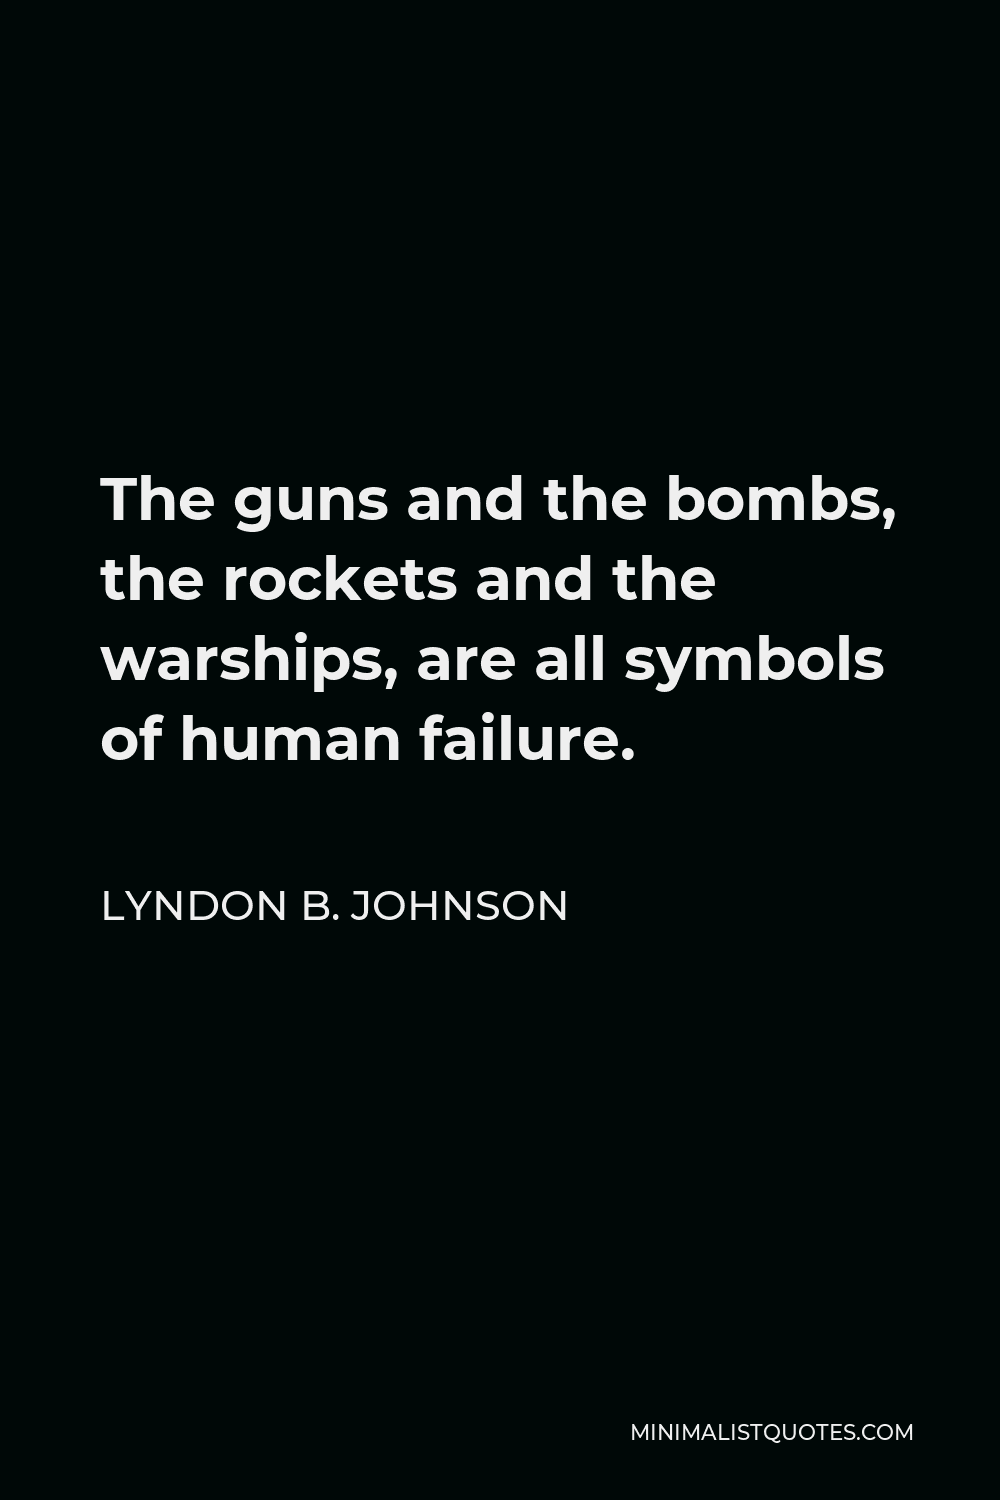 Lyndon B. Johnson Quote - The guns and the bombs, the rockets and the warships, are all symbols of human failure.